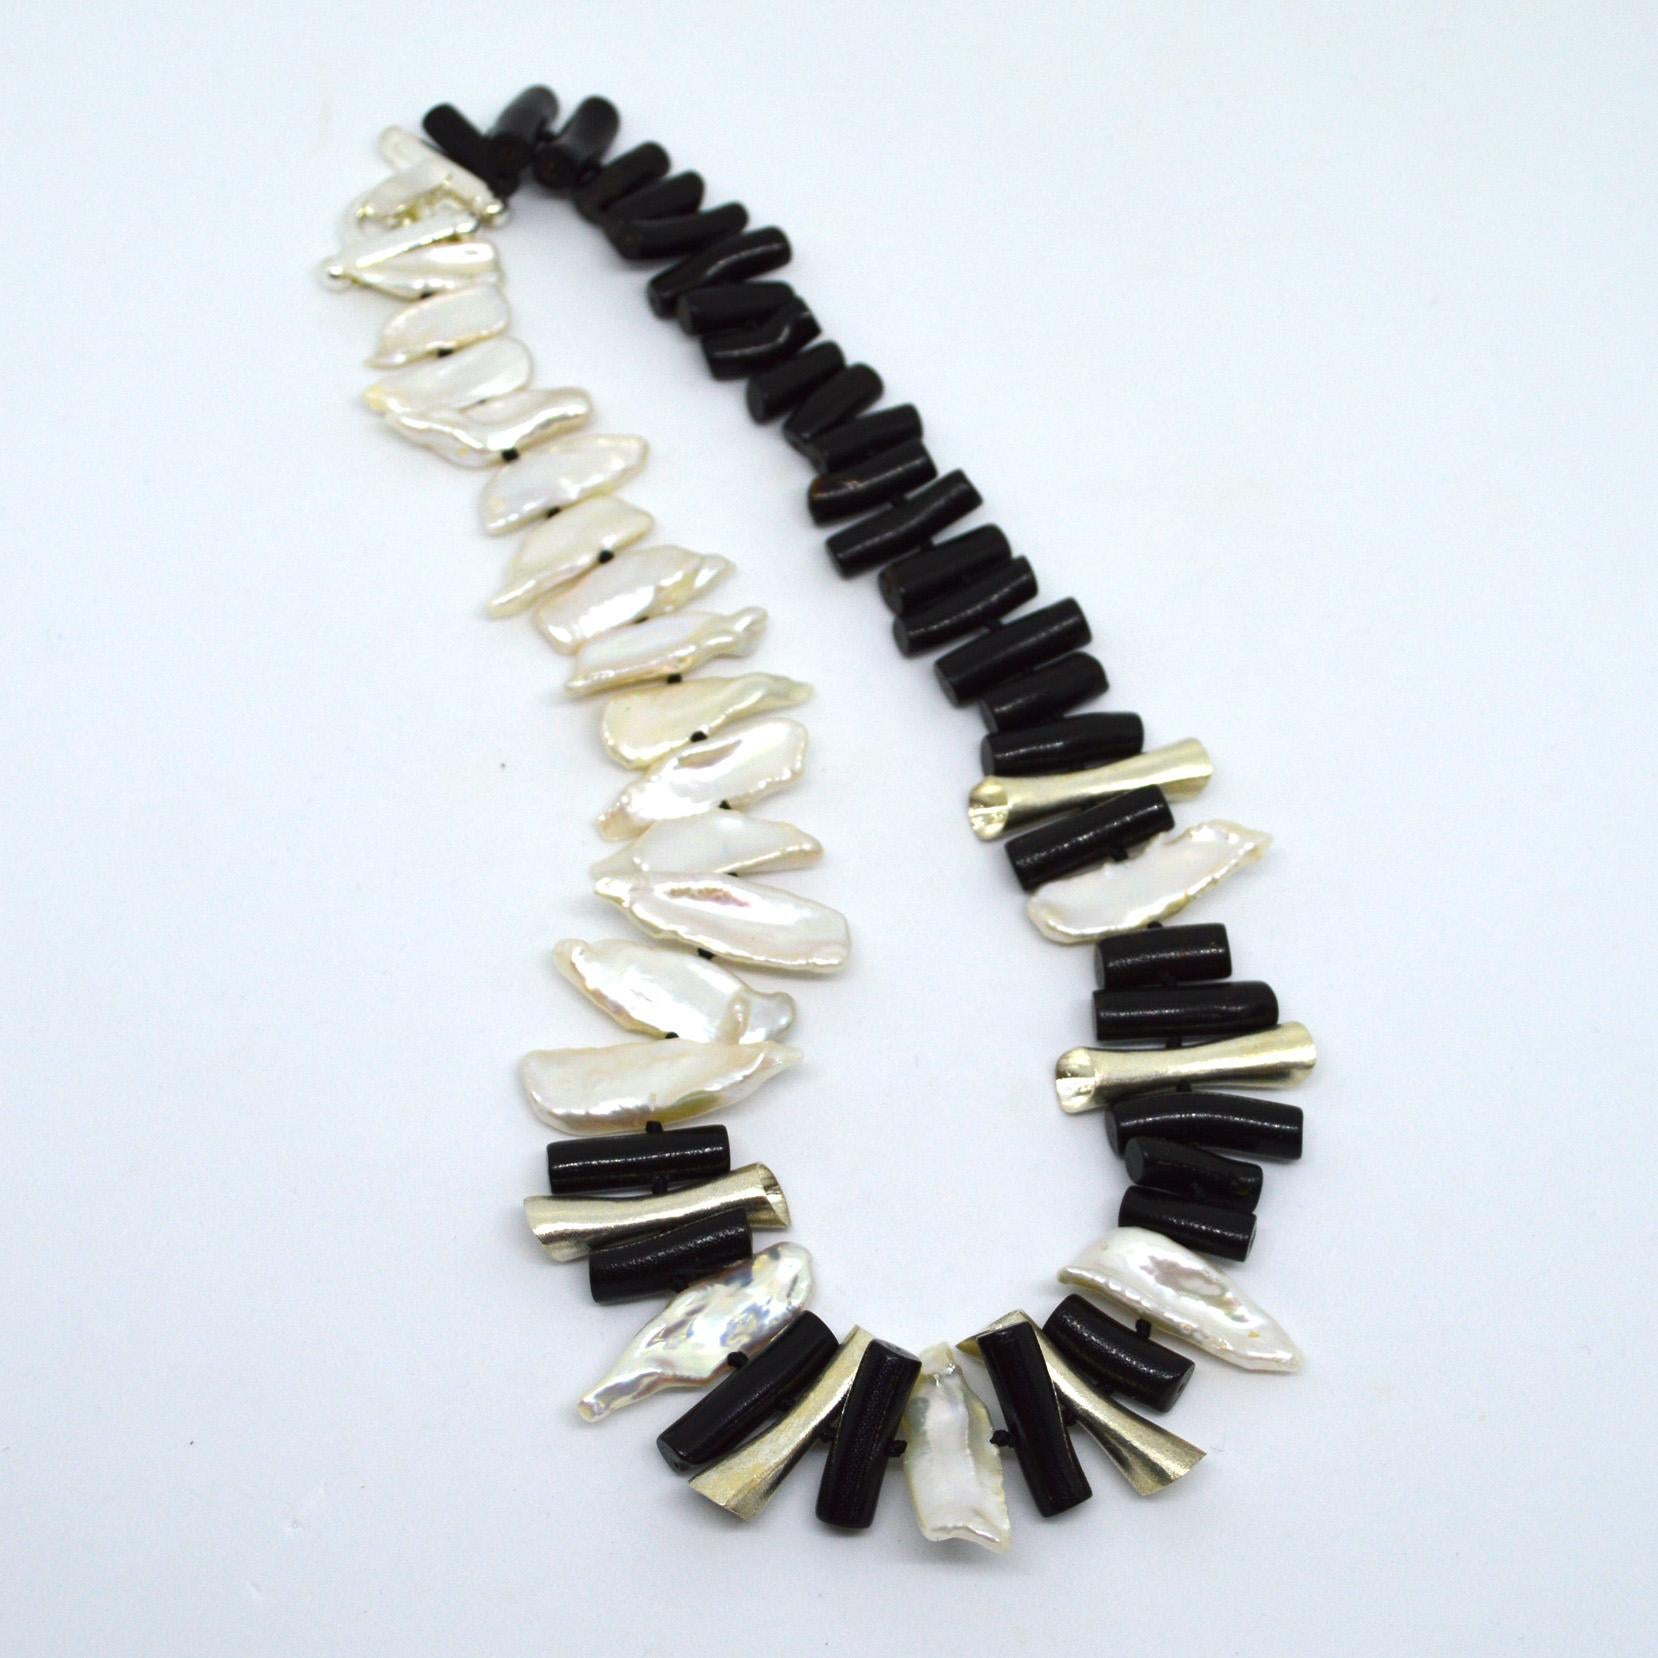 Statement necklace of Fresh Water Keshi Pearls approx 30mm with black coral sticks and sterling silver tube beads hand knotted on black thread with a Sterling Silver clasp. 

Finished necklace measures 52cm.
Shipped in a Jewellery Box.